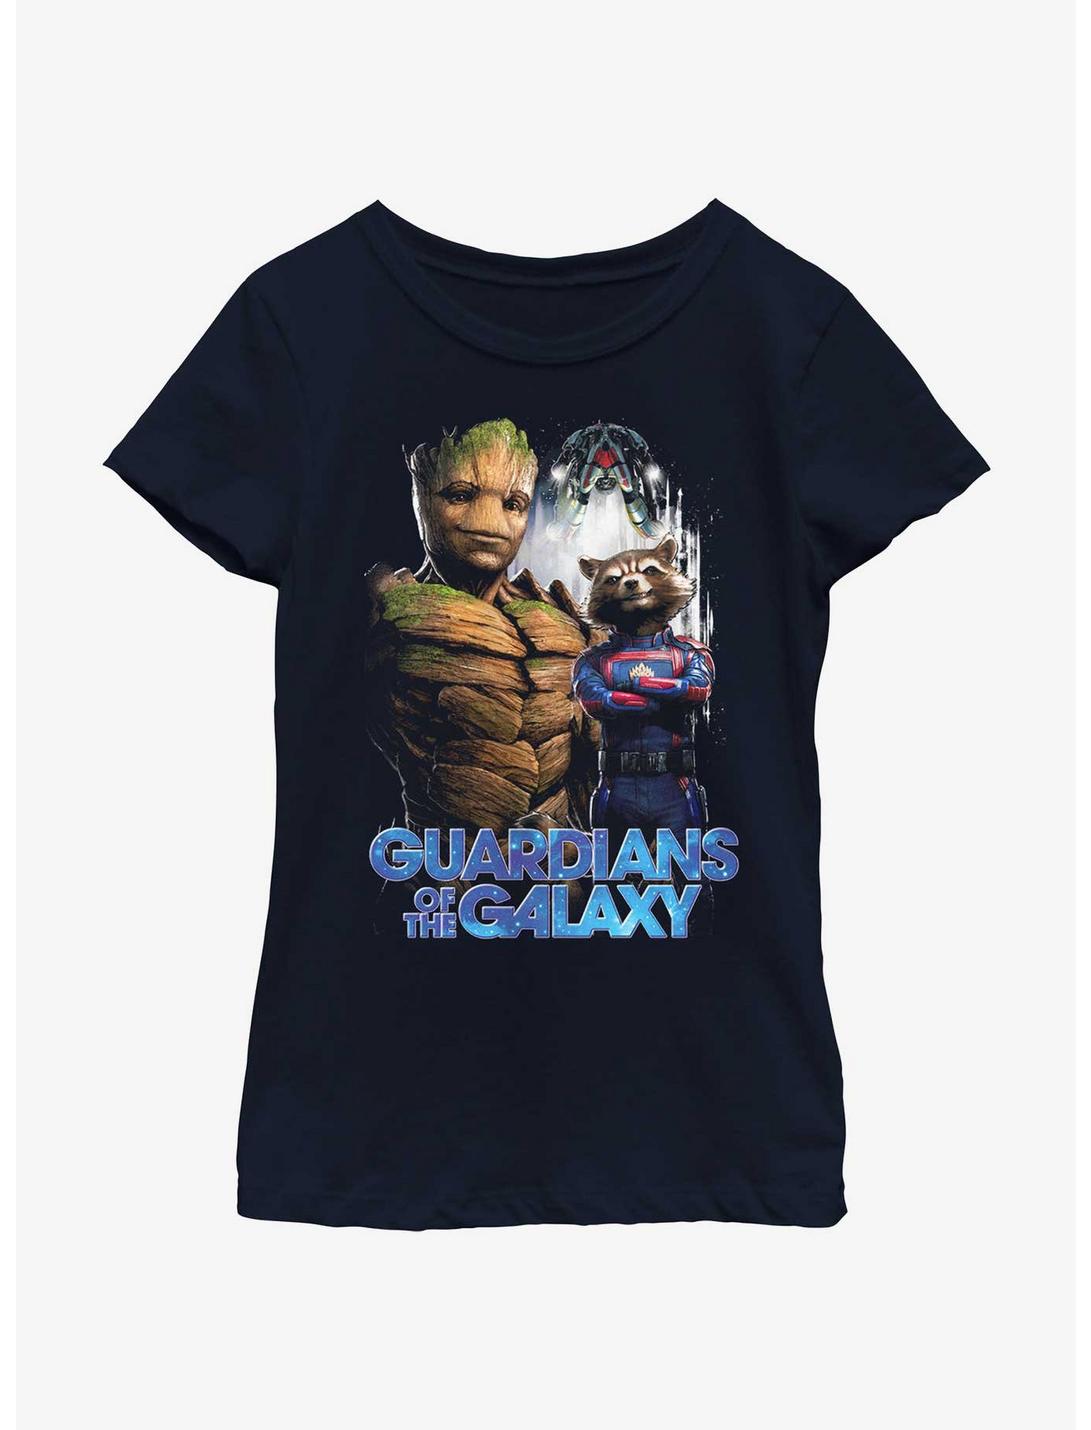 Marvel Guardians of the Galaxy Vol. 3 Duo Team Groot and Rocket Youth Girls T-Shirt, NAVY, hi-res